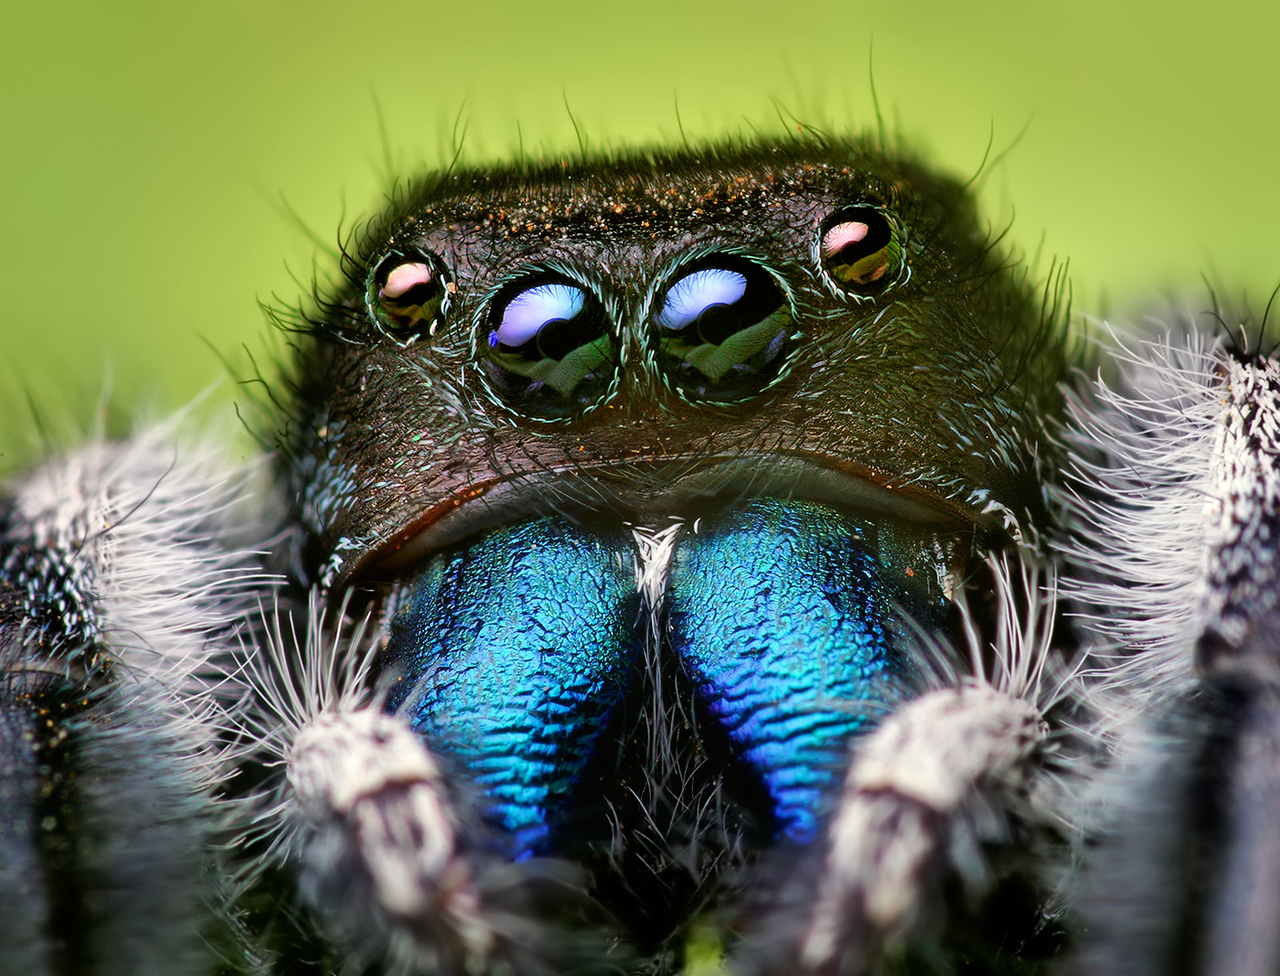 Although it may look scary, the daring jumping spider is non-poisonous and is not harmful to humans. It does not build webs, but instead uses silk to make a web safety line when jumping just in case it misses.